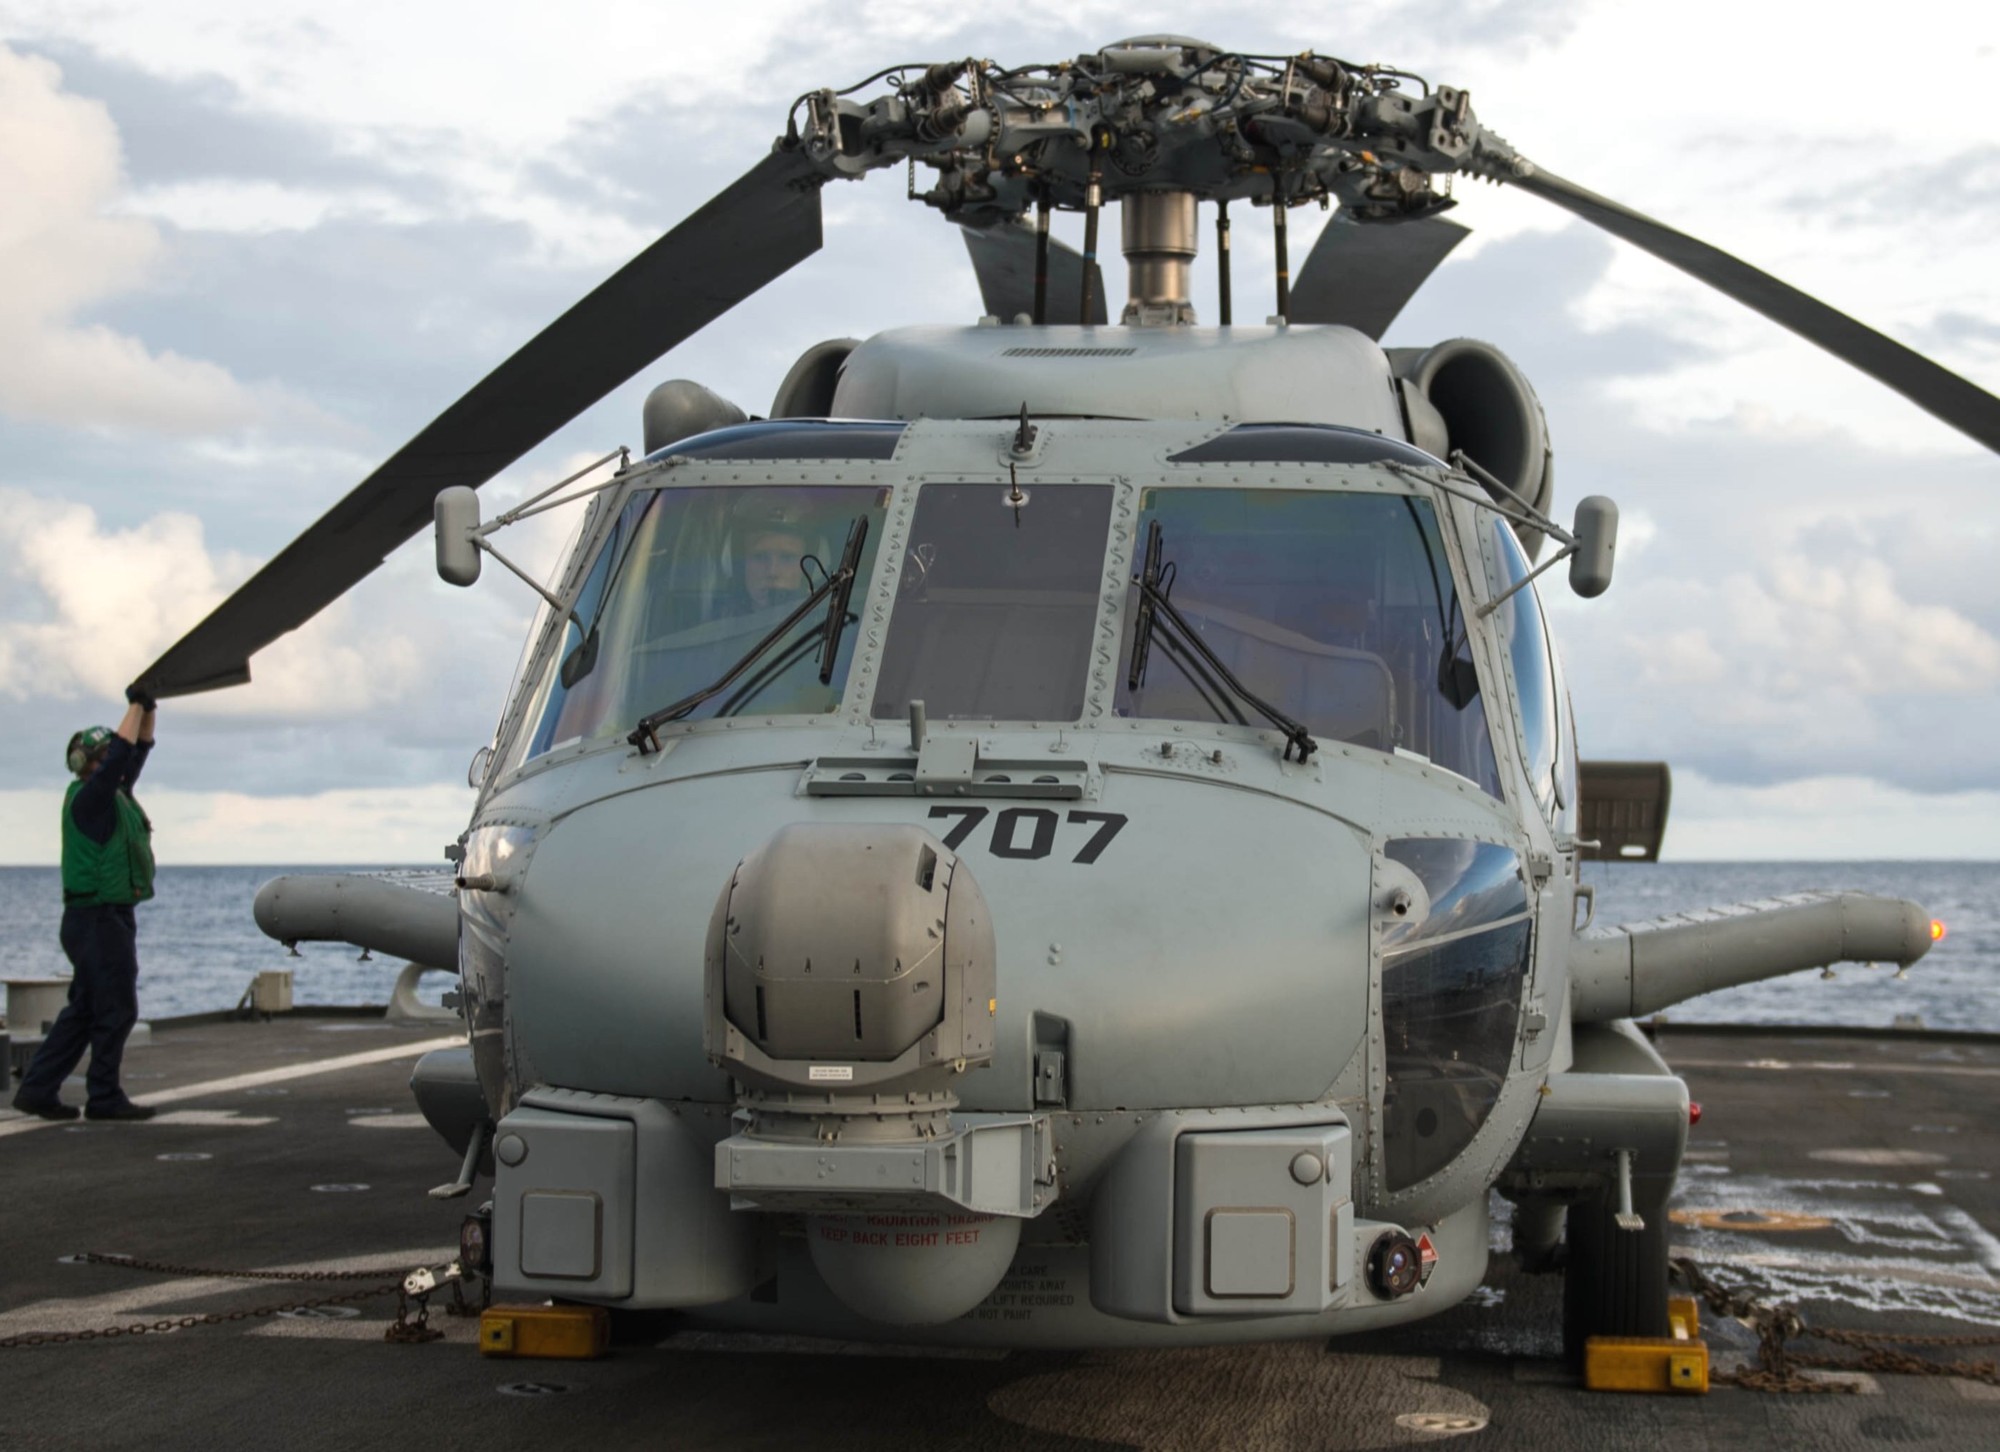 hsm-73 battlecats helicopter maritime strike squadron us navy mh-60r seahawk 2013 22